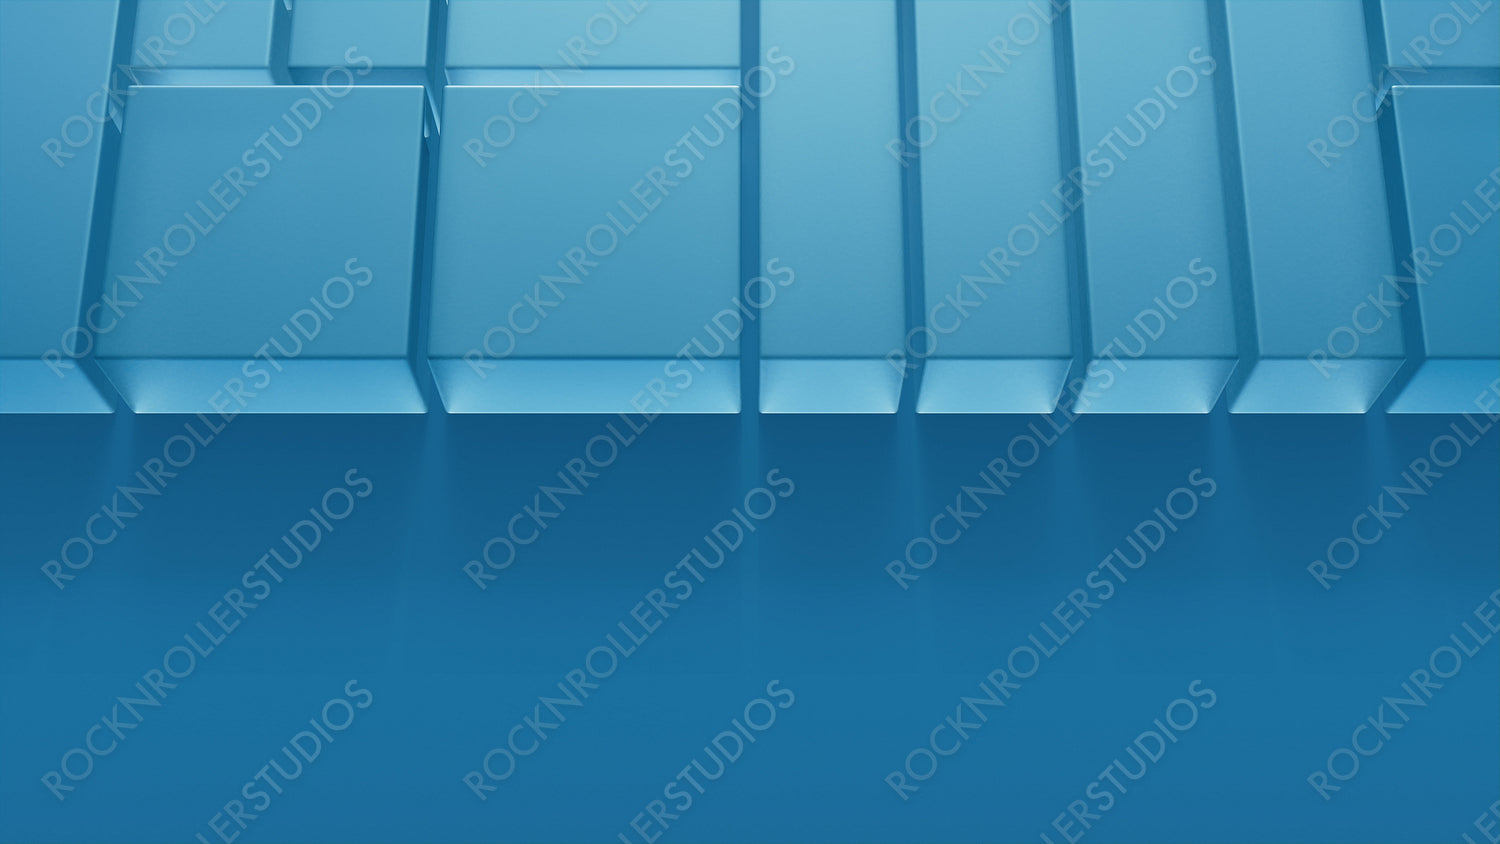 Frosted Glass Blocks on a Blue Surface. Visionary Tech Aesthetic with space for copy. 3D Render.